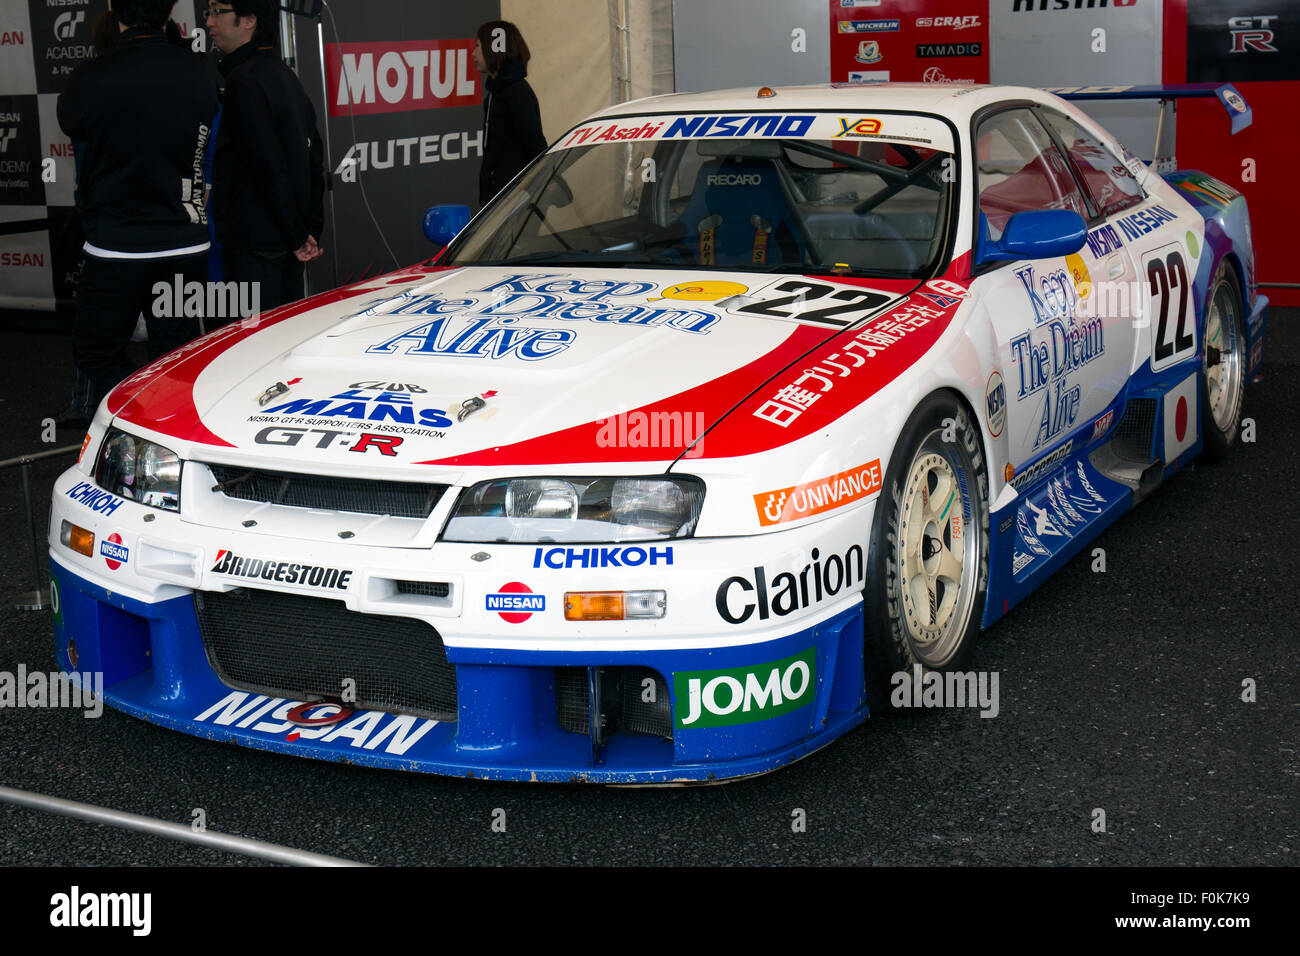 Nismo Nissan GT-R LM (1995) parte anteriore sinistra 2015 Motorsport Giappone Foto Stock